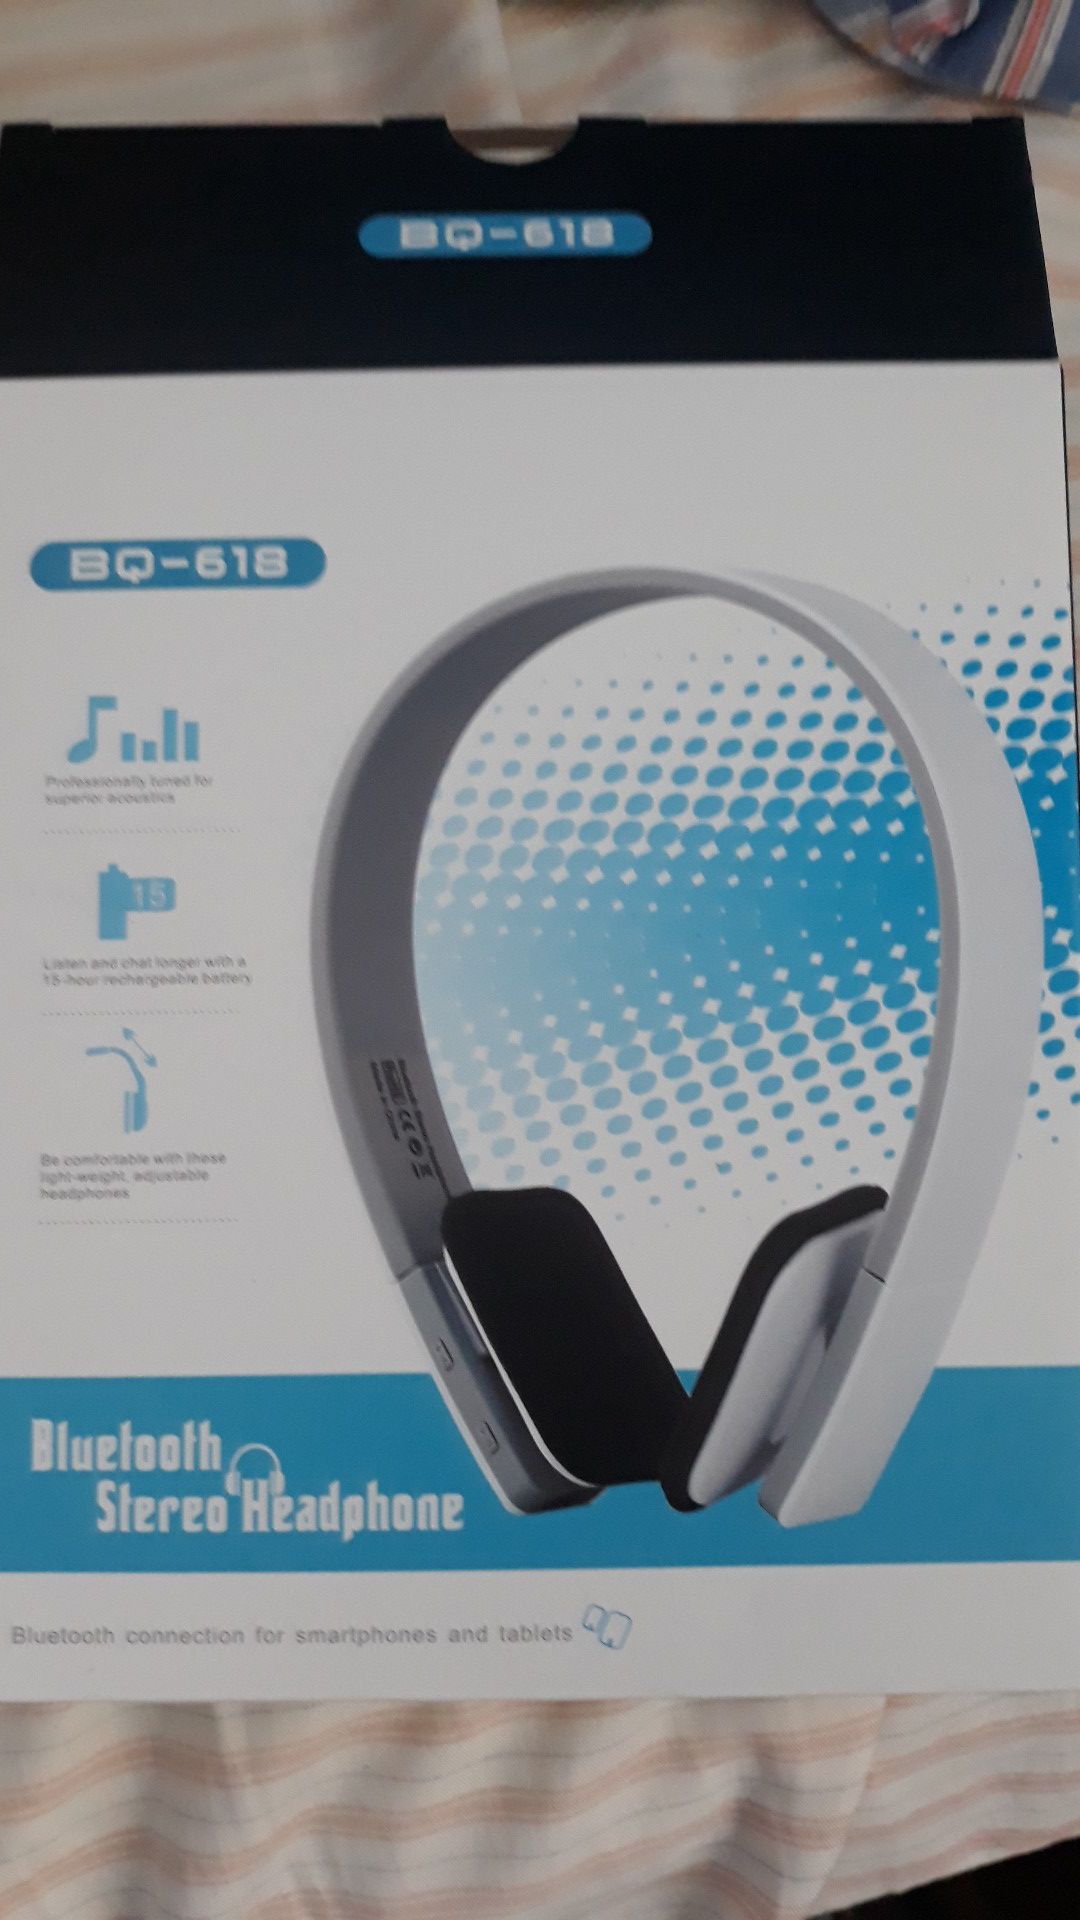 Bluetooth stereo noise cancelling headphones